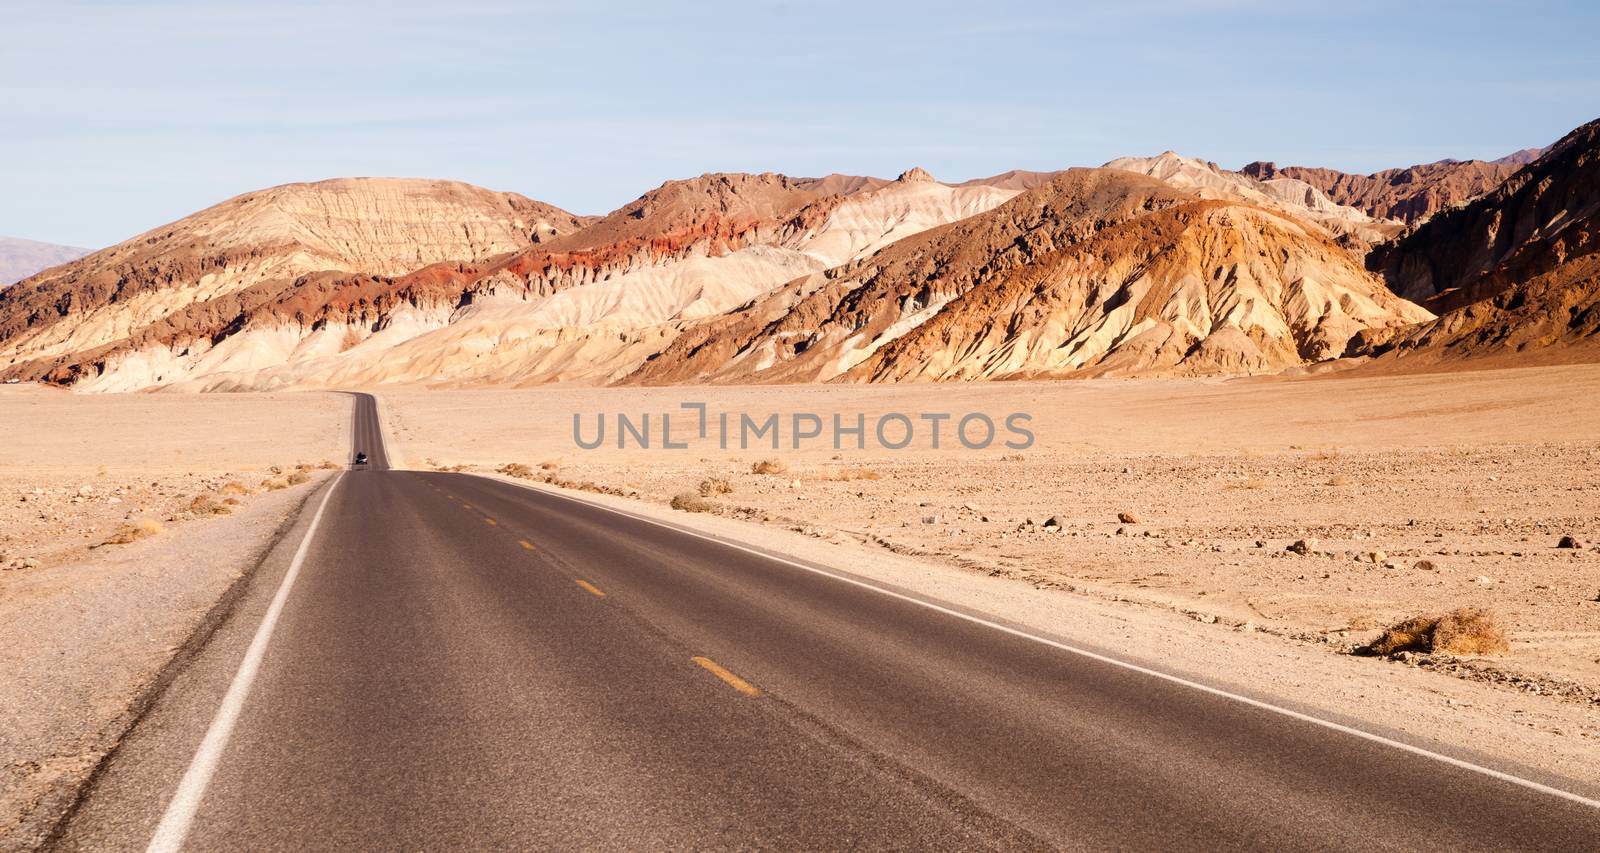 Lonely Car Long Highway Badwater Basin Death Valley by ChrisBoswell